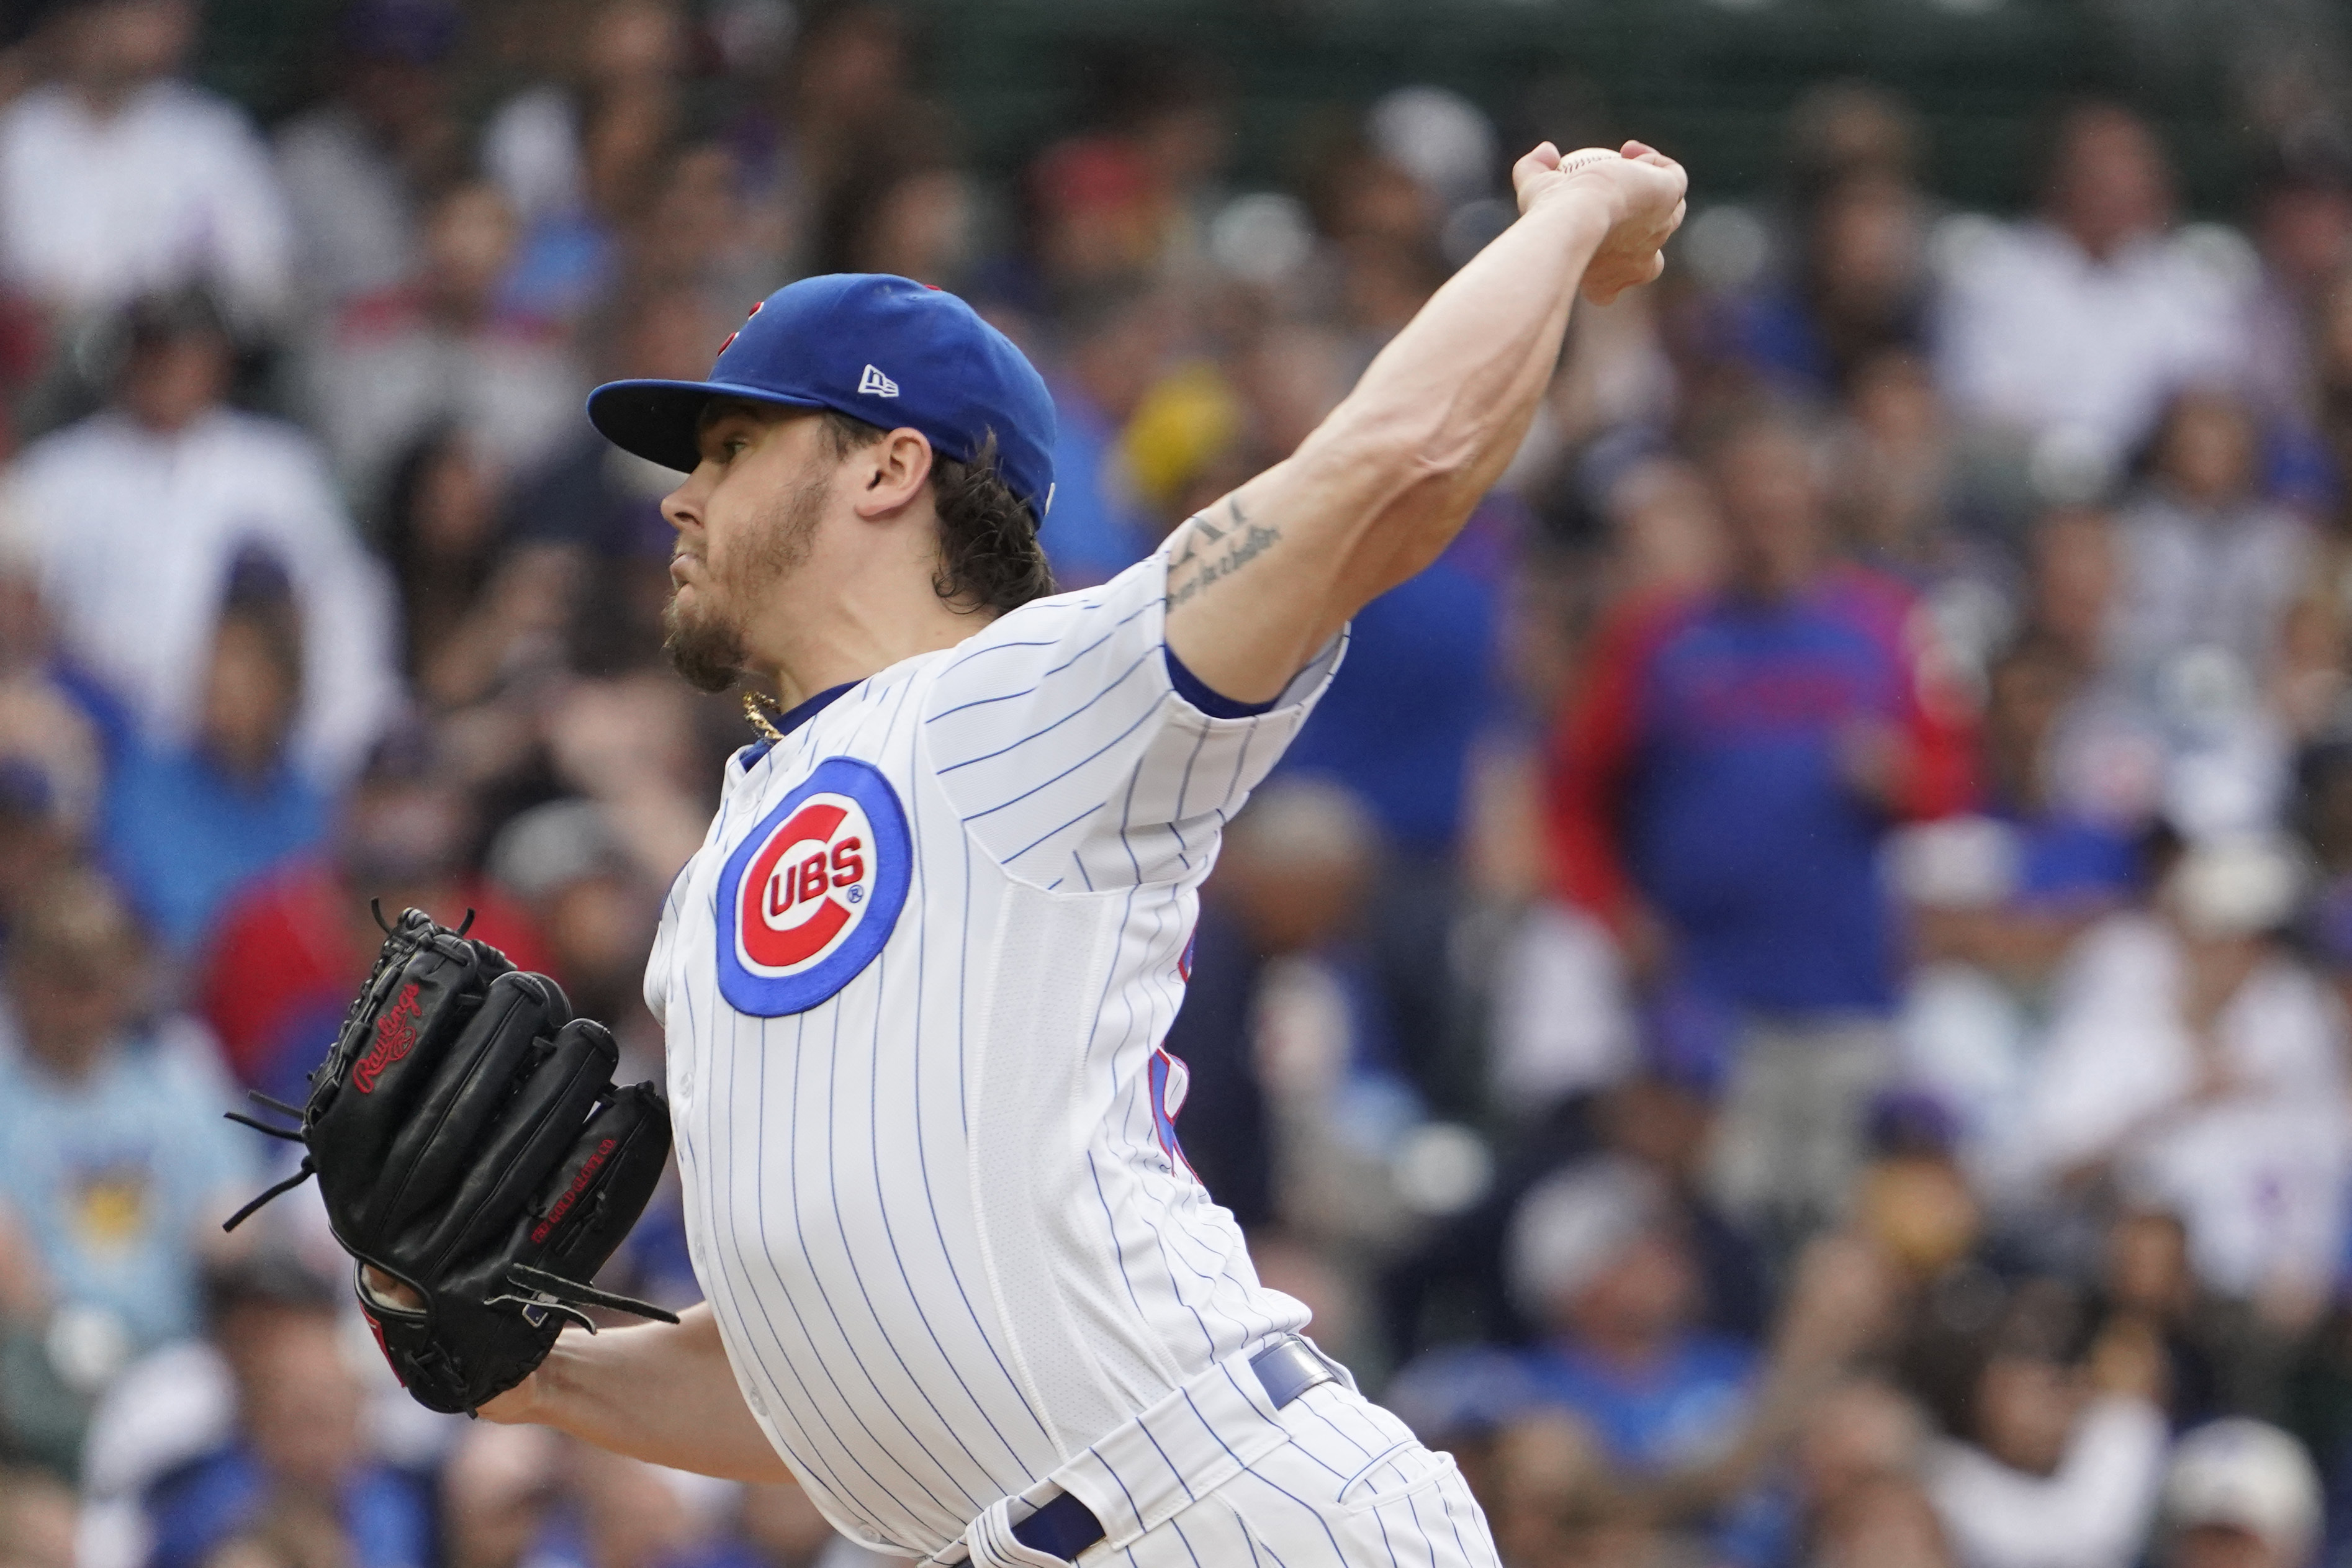 Cubs stay hot, rally past Braves 6-4